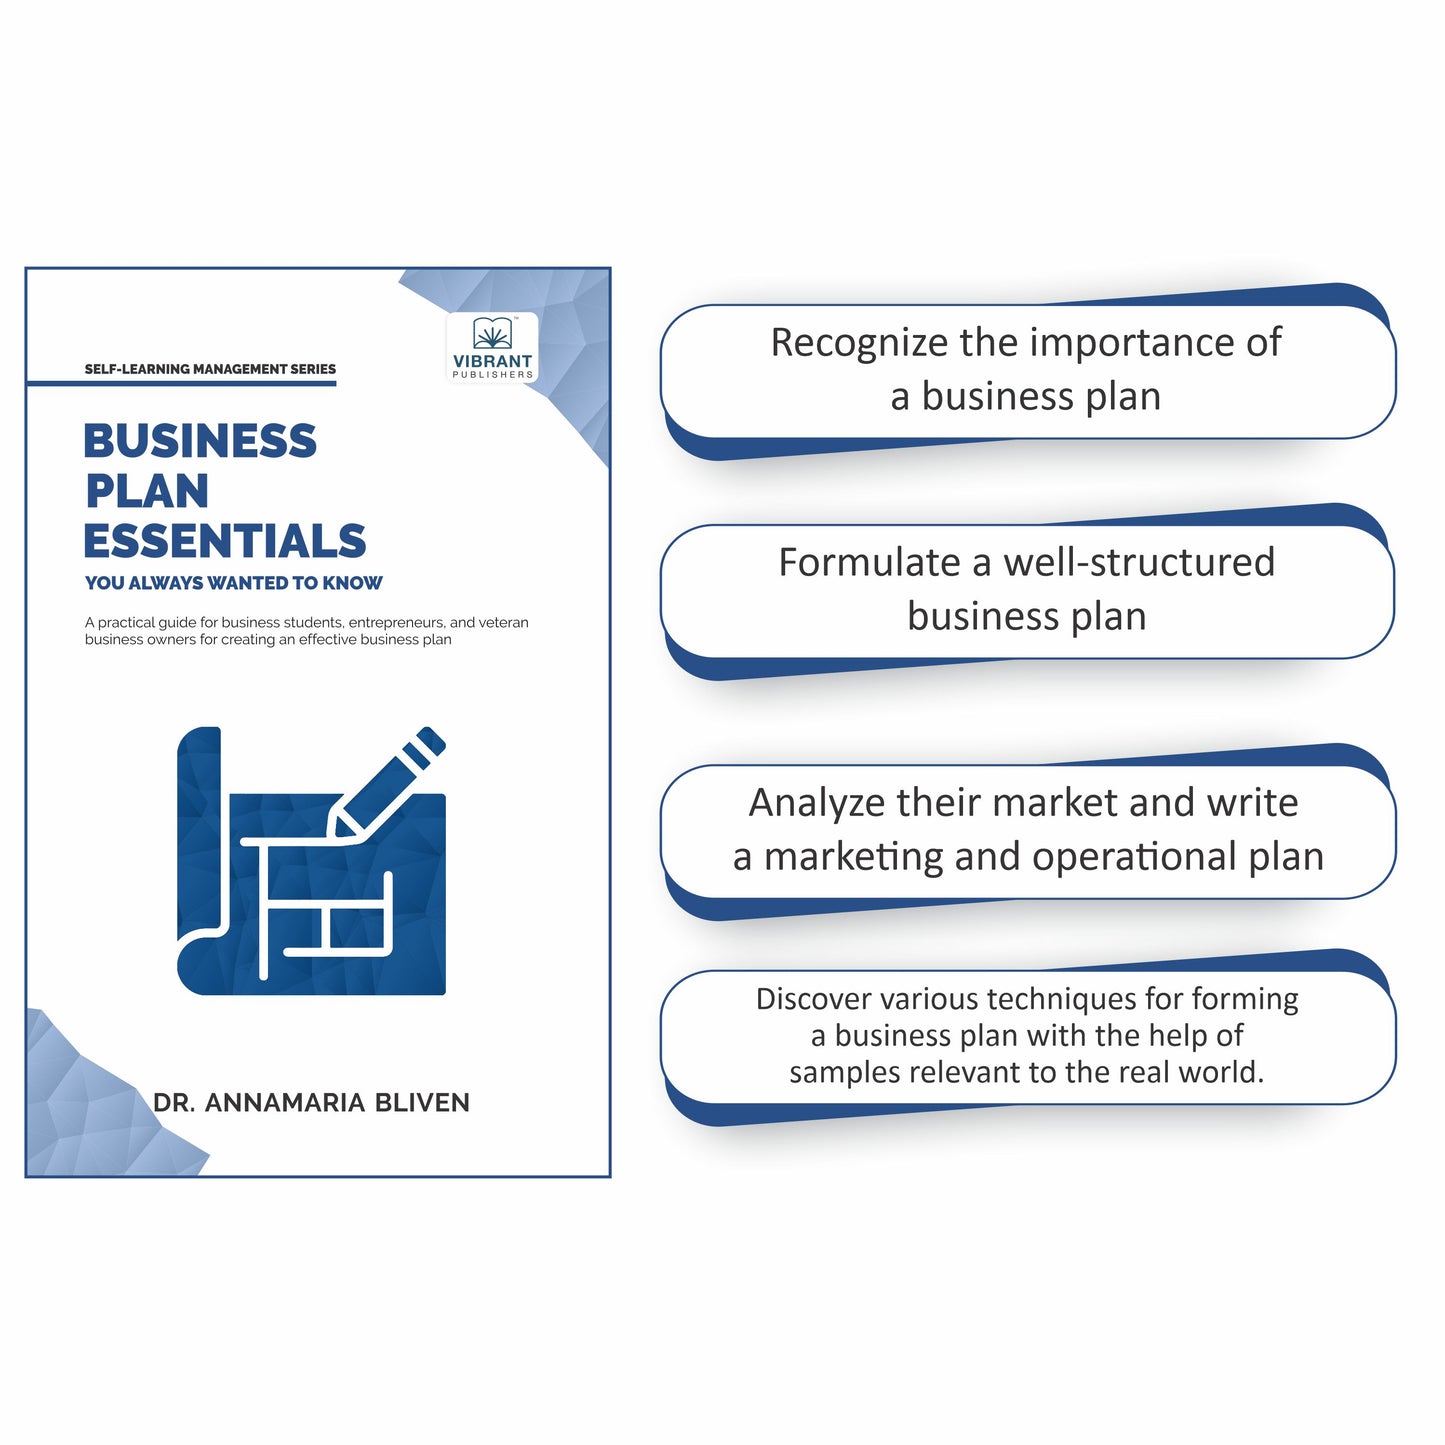 Business Strategy and Planning Fundamentals - Includes a guide on Business Laws in the US